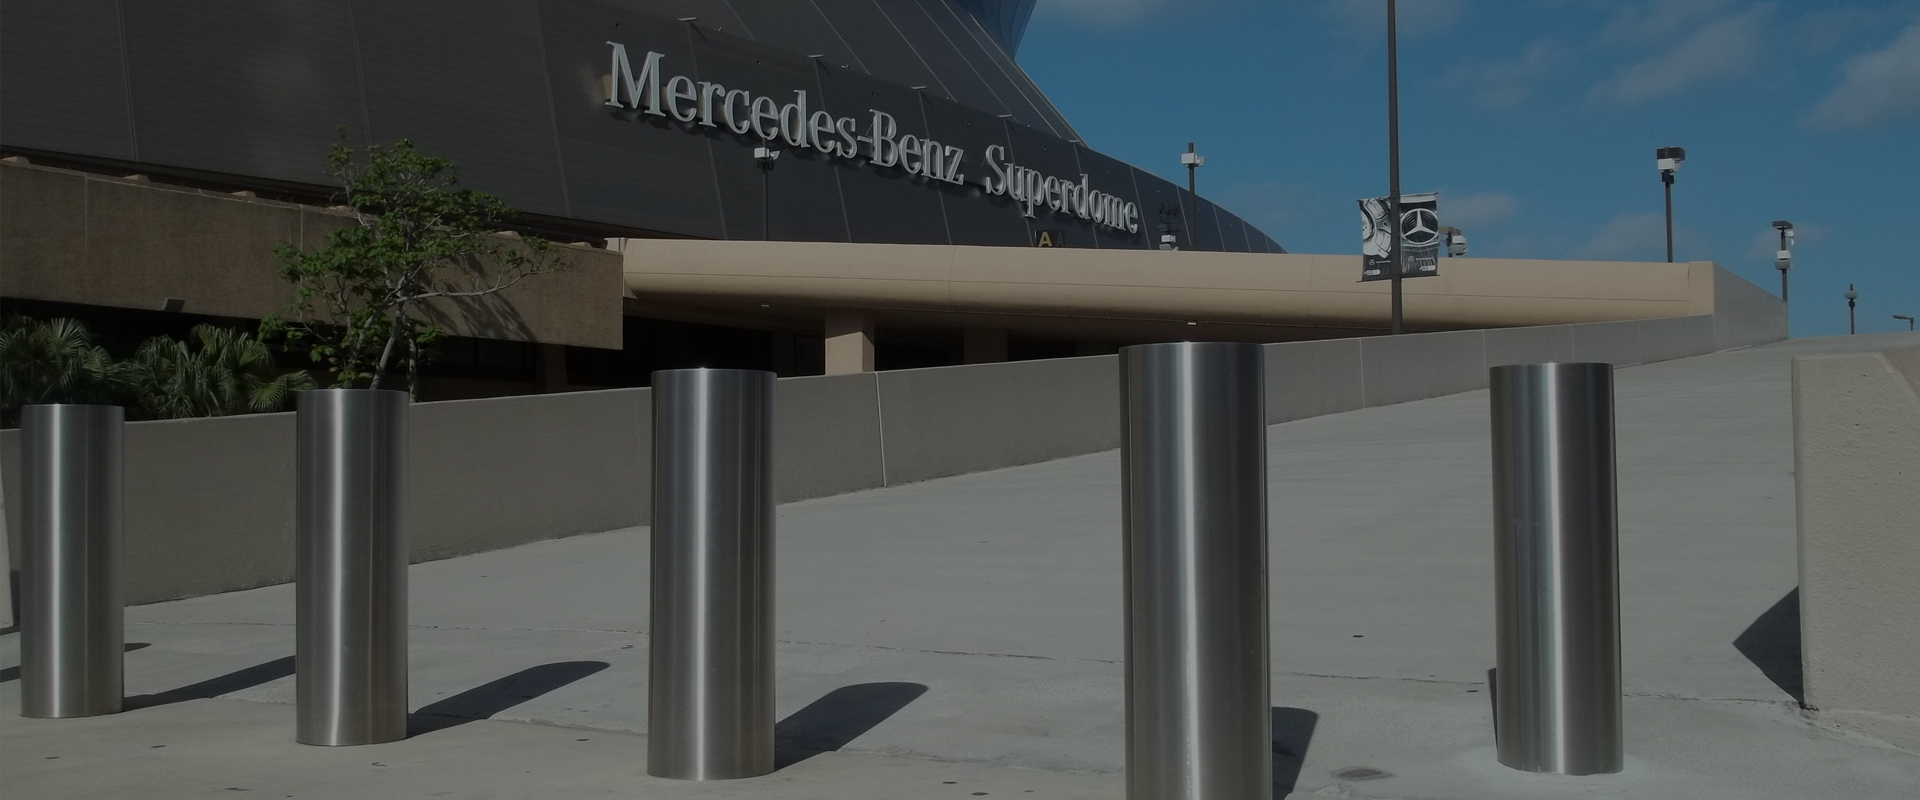 bollards in front of Mercedes Benz Superdome